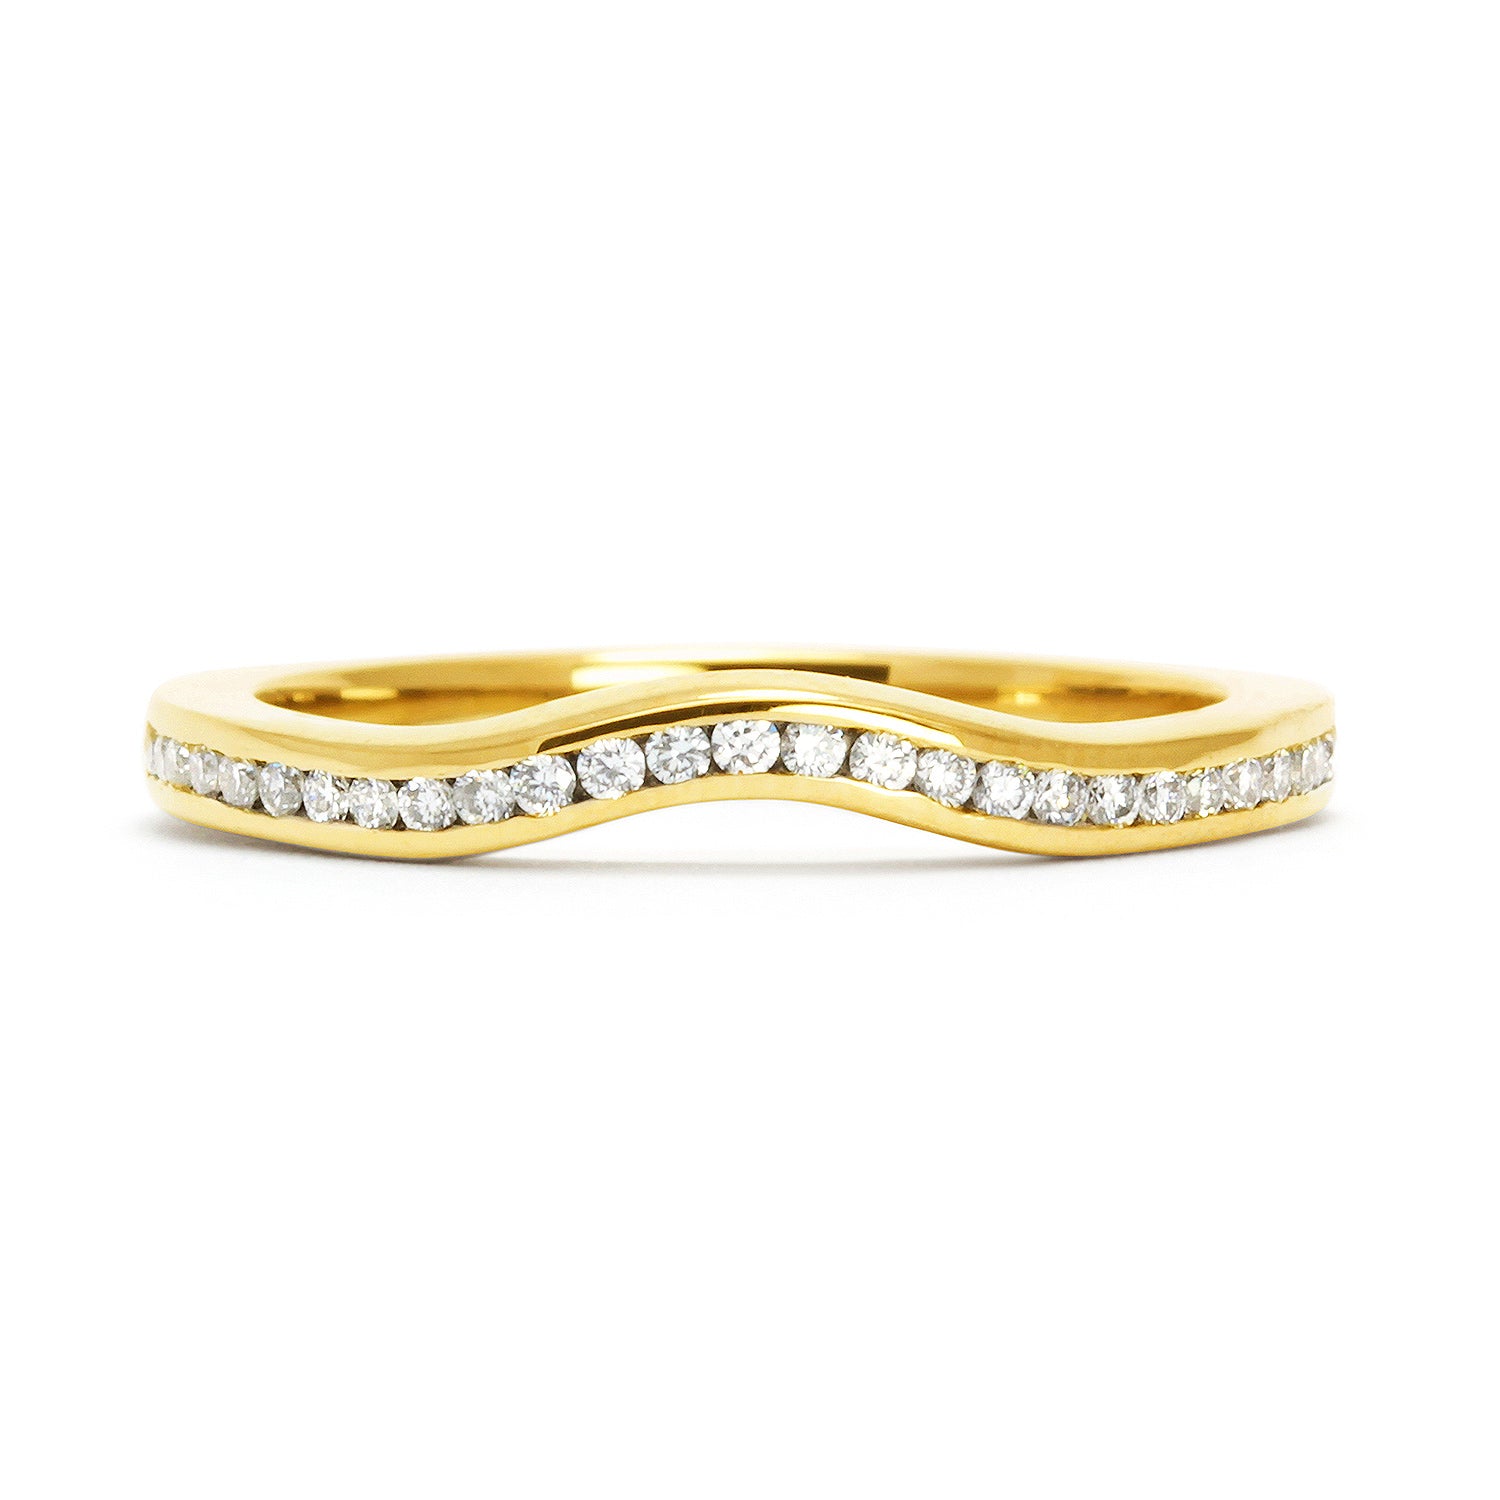 Lebrusan Studio's Accademia shaped stacking wedding band half channel-set with conflict-free diamonds, cast in 18ct ethical yellow gold